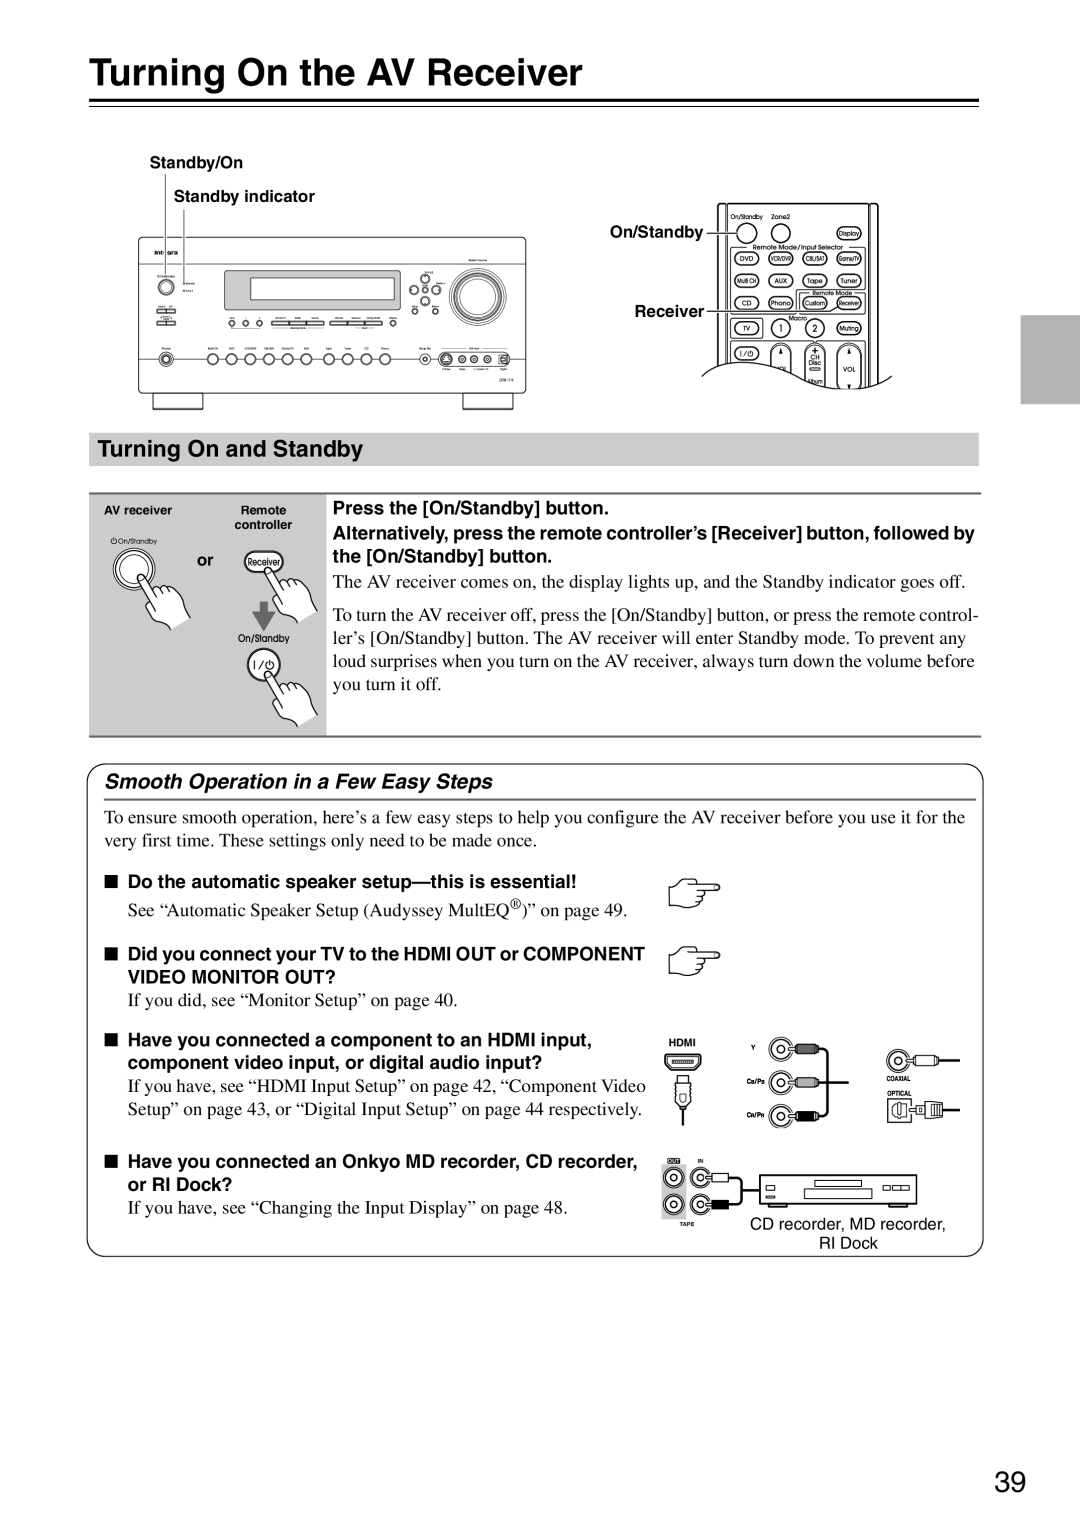 Onkyo DTR-7.9 instruction manual Turning On the AV Receiver, Turning On and Standby, Smooth Operation in a Few Easy Steps 